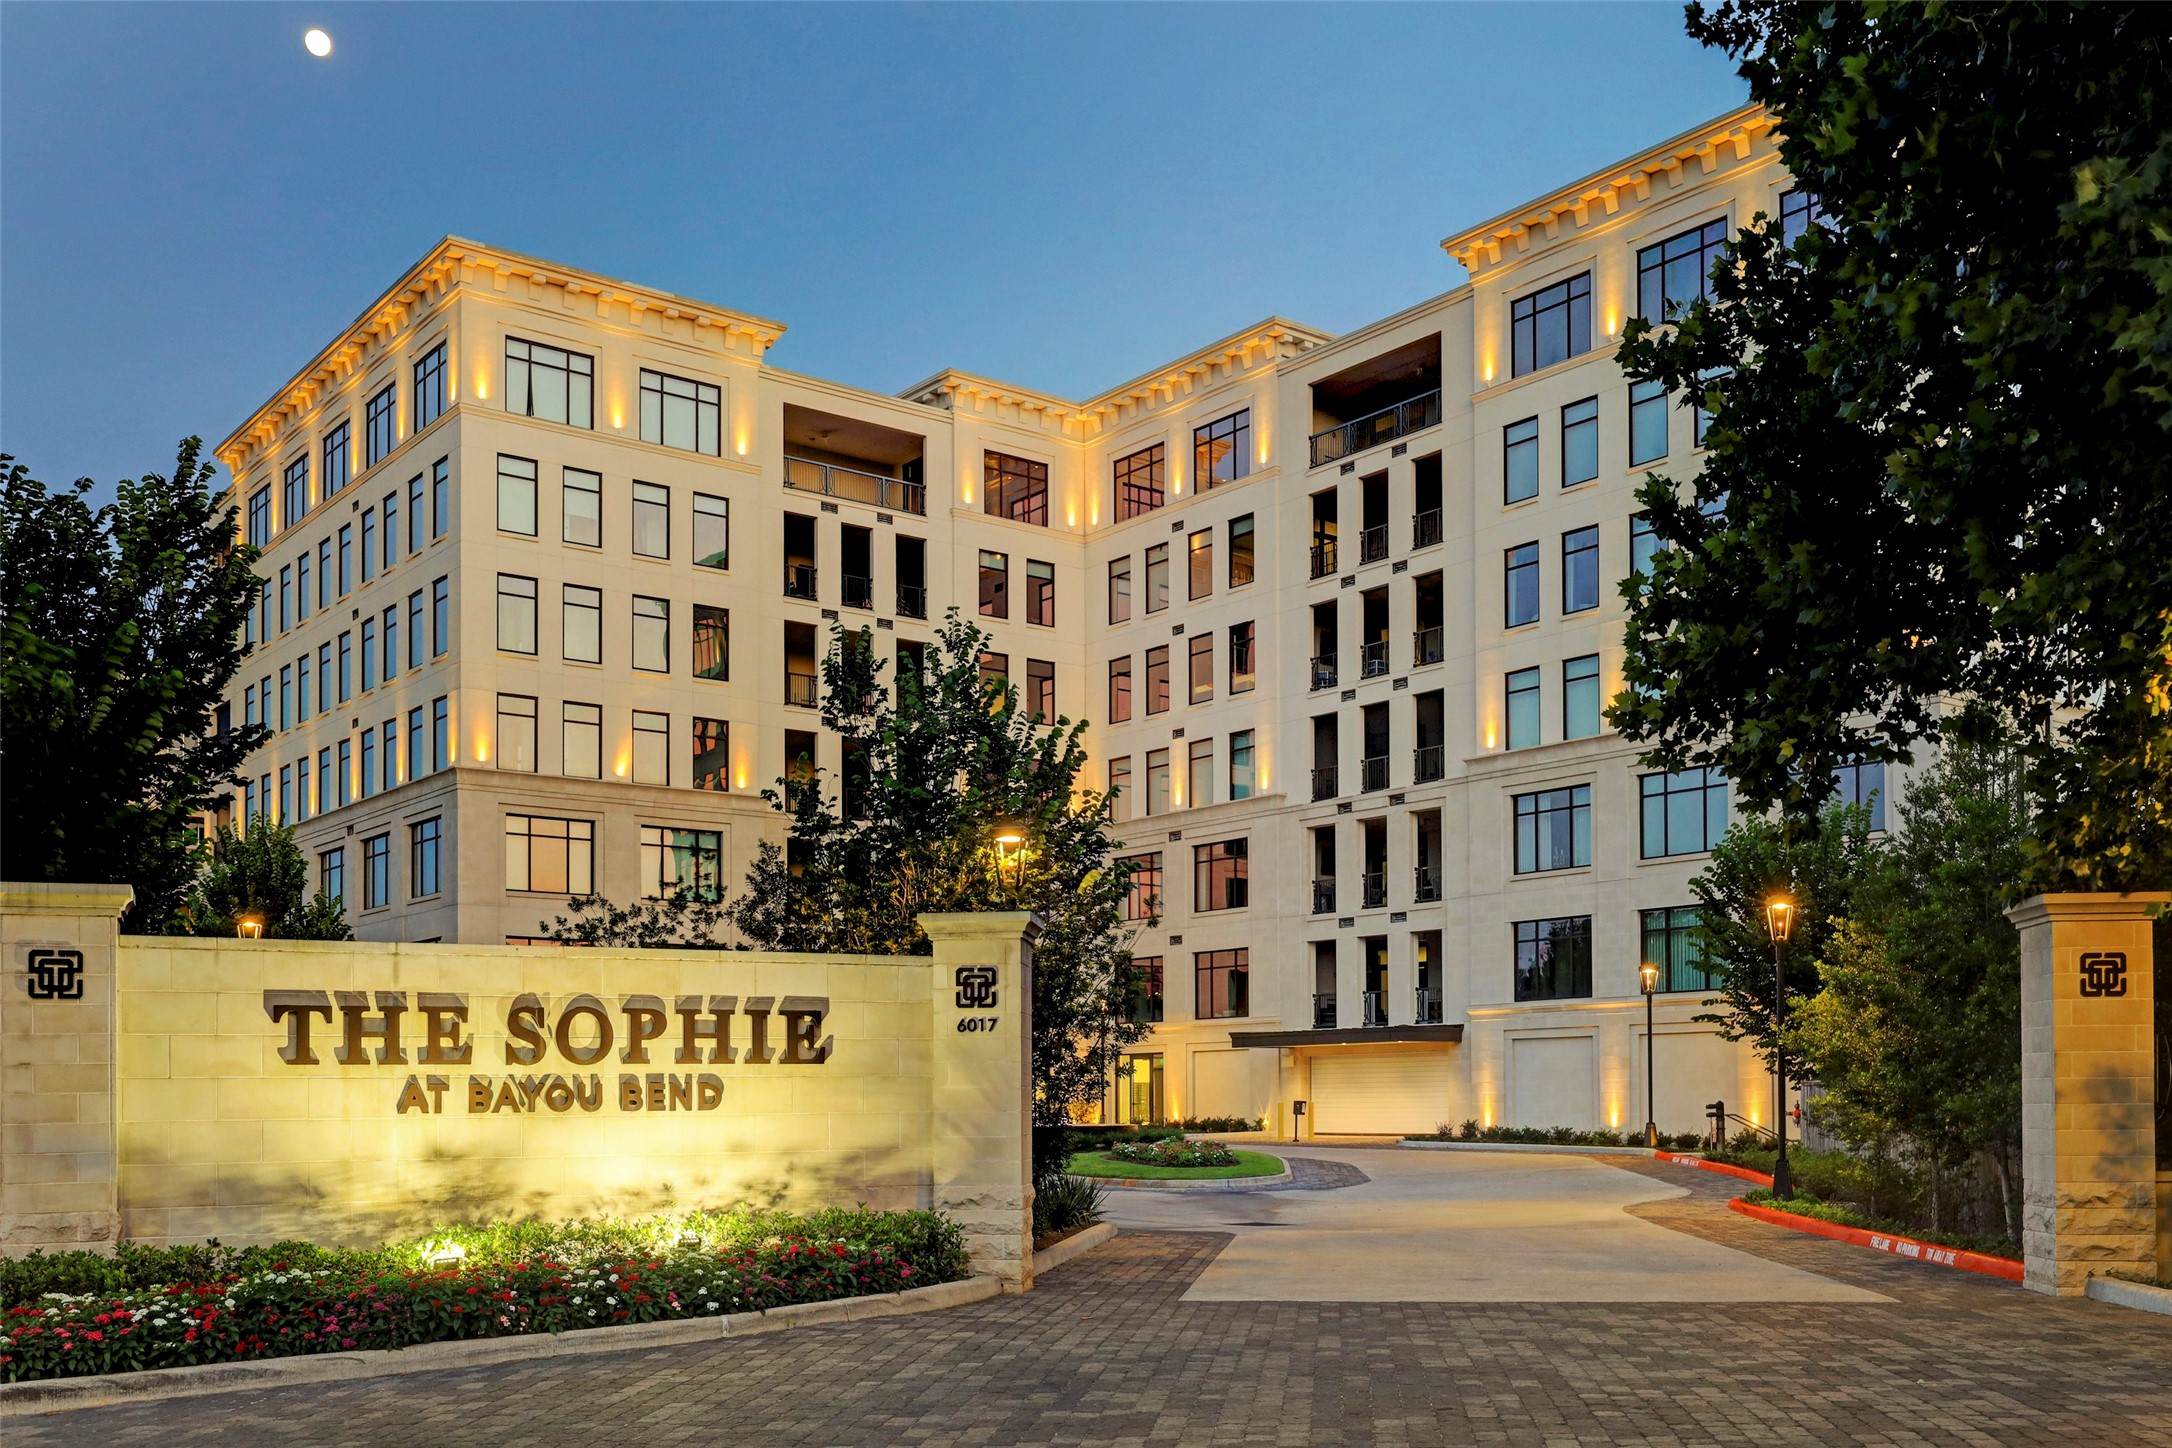 The Sophie is a European-style residence offering privacy, security, amenities, and a luxurious, carefree lifestyle. Located midway between Memorial + Buffalo Bayou Parks you can bike ride, run, enjoy museums, fine dining and shopping all within your little realm.